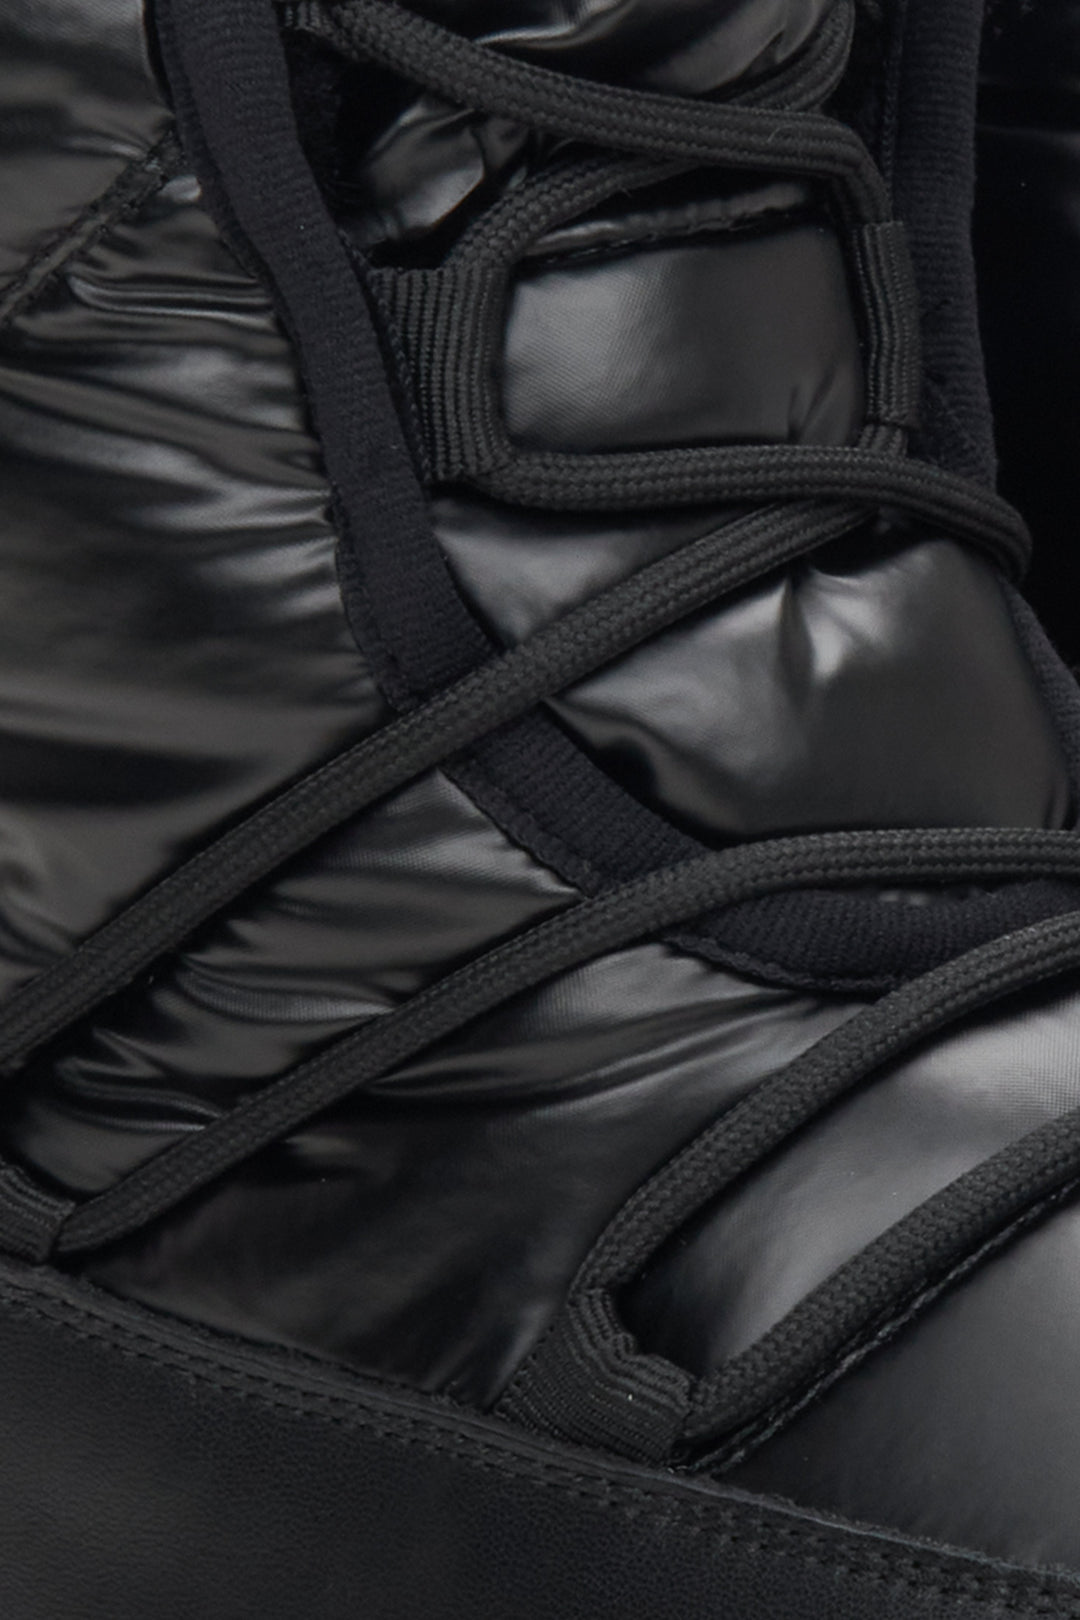 Women's black snow boots with a glossy finish by Estro - close-up on the detail.